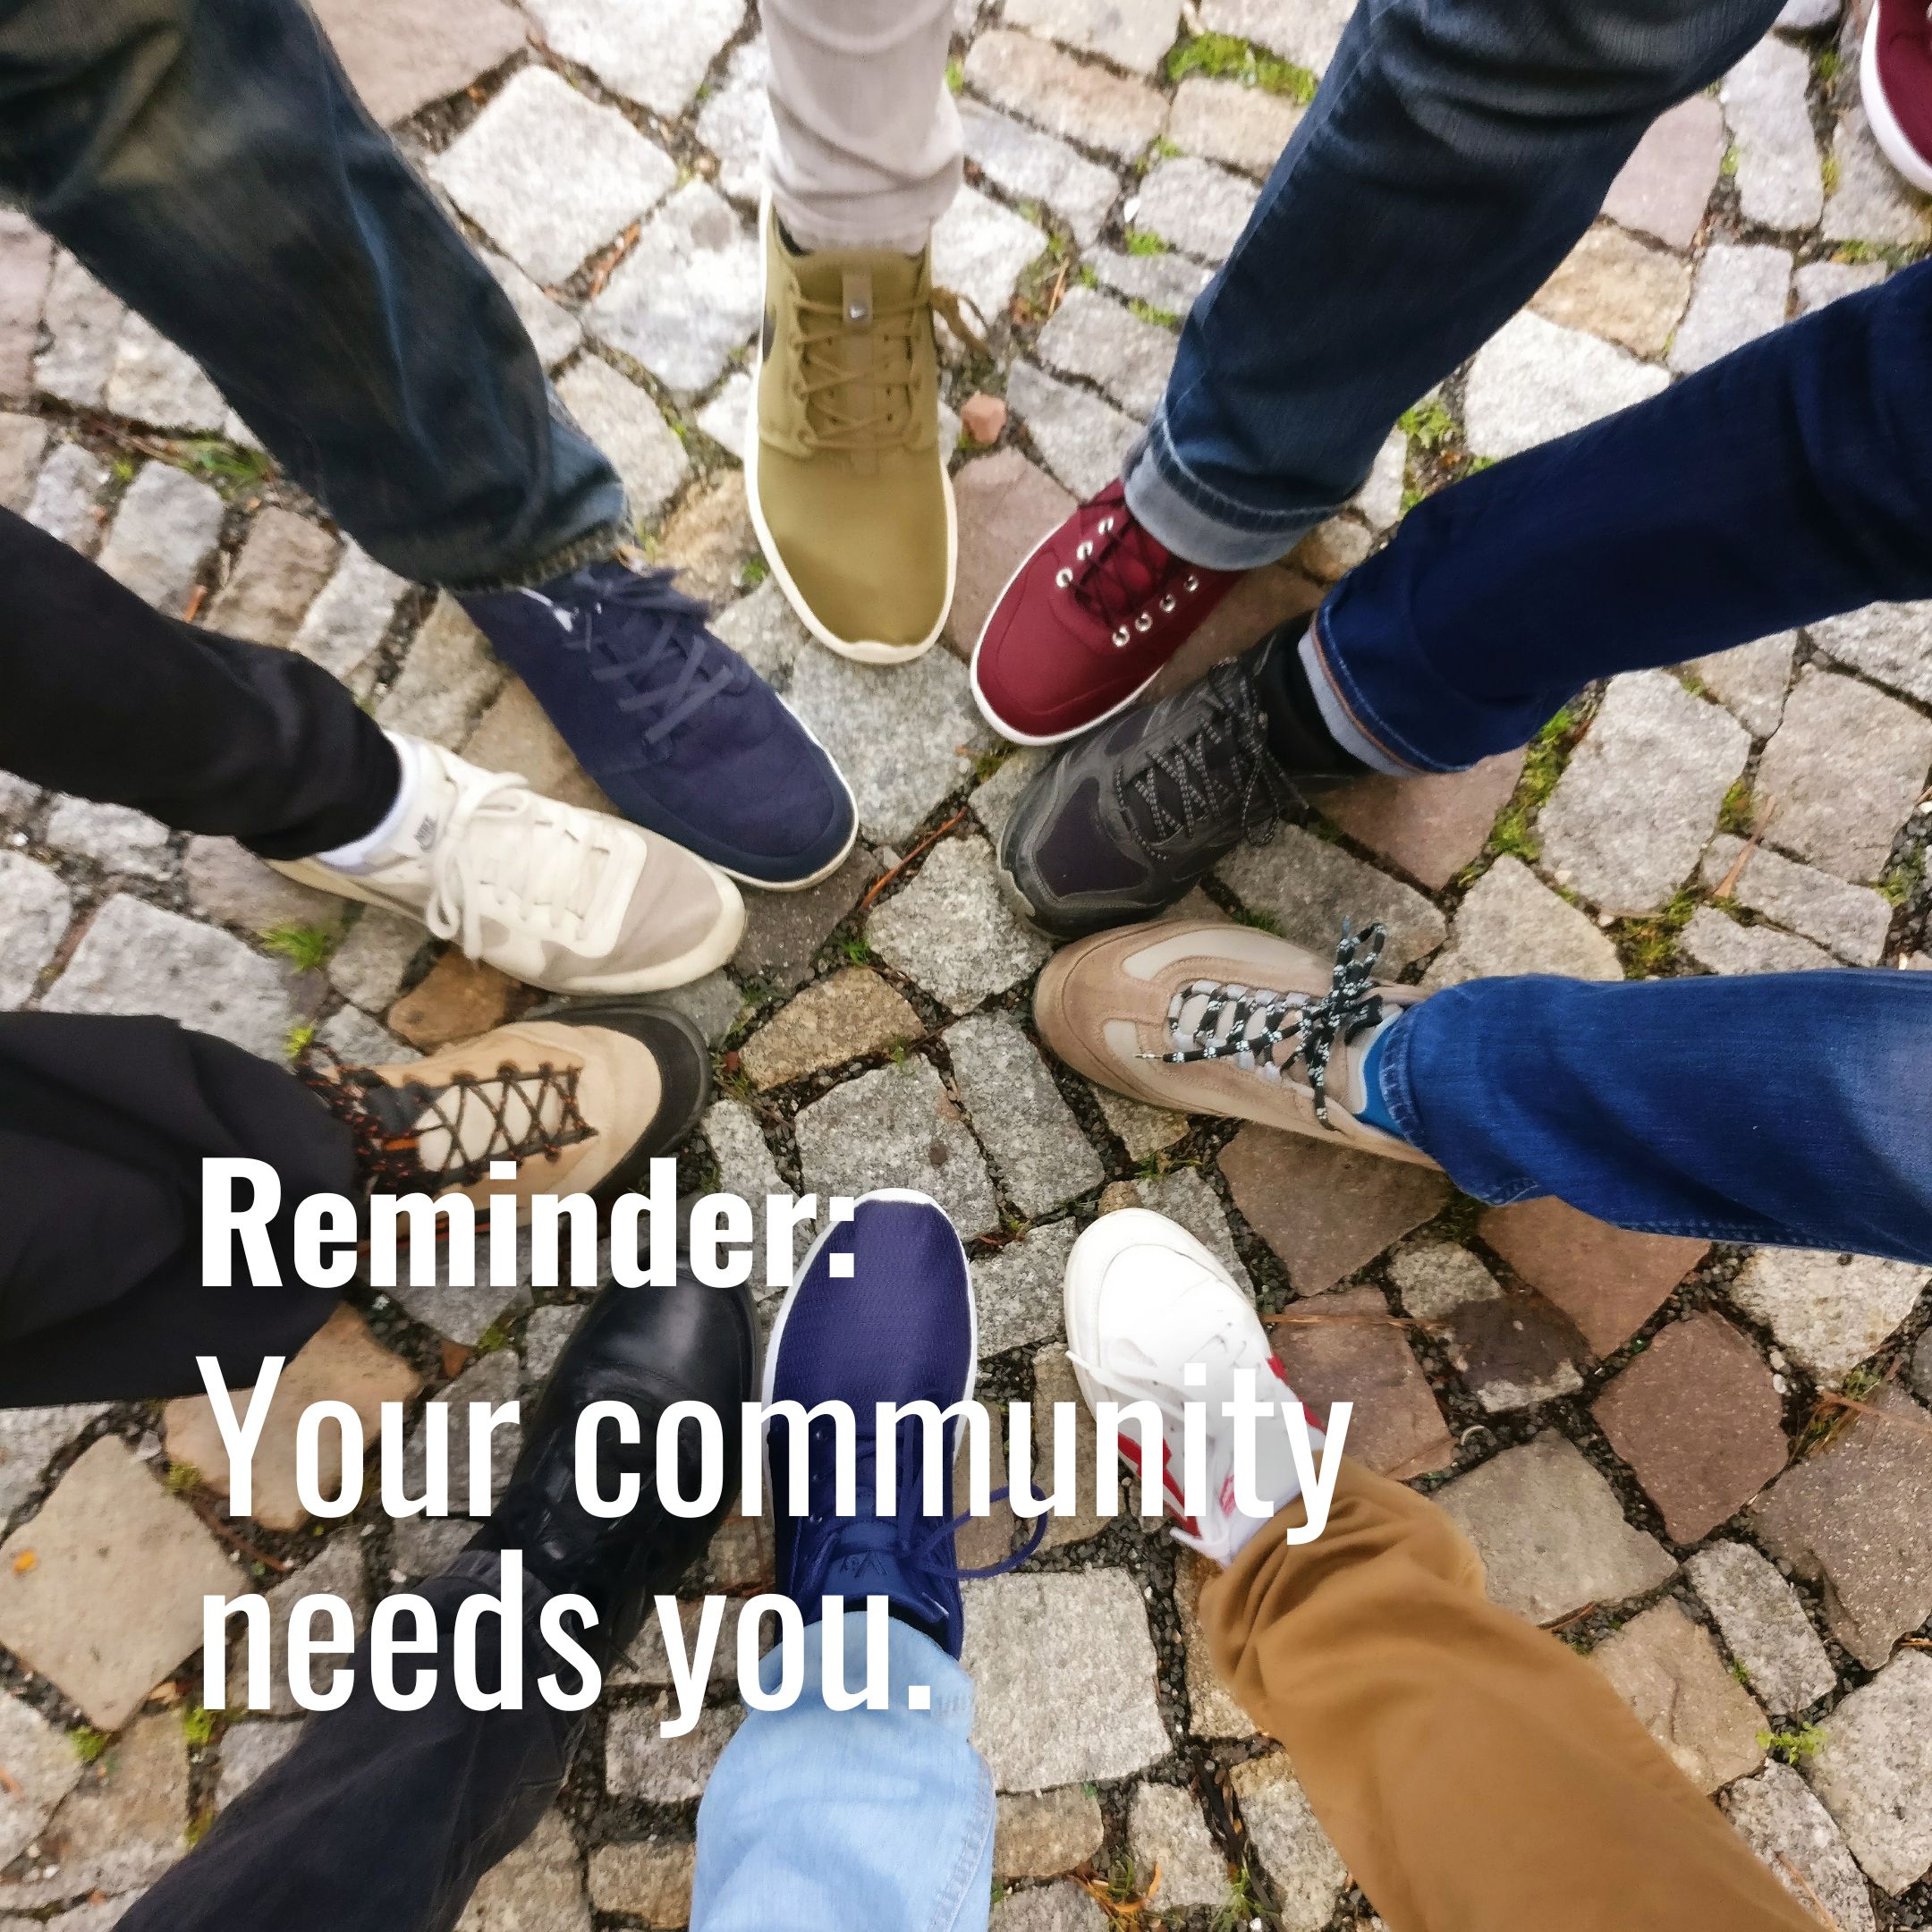 Your community needs you.